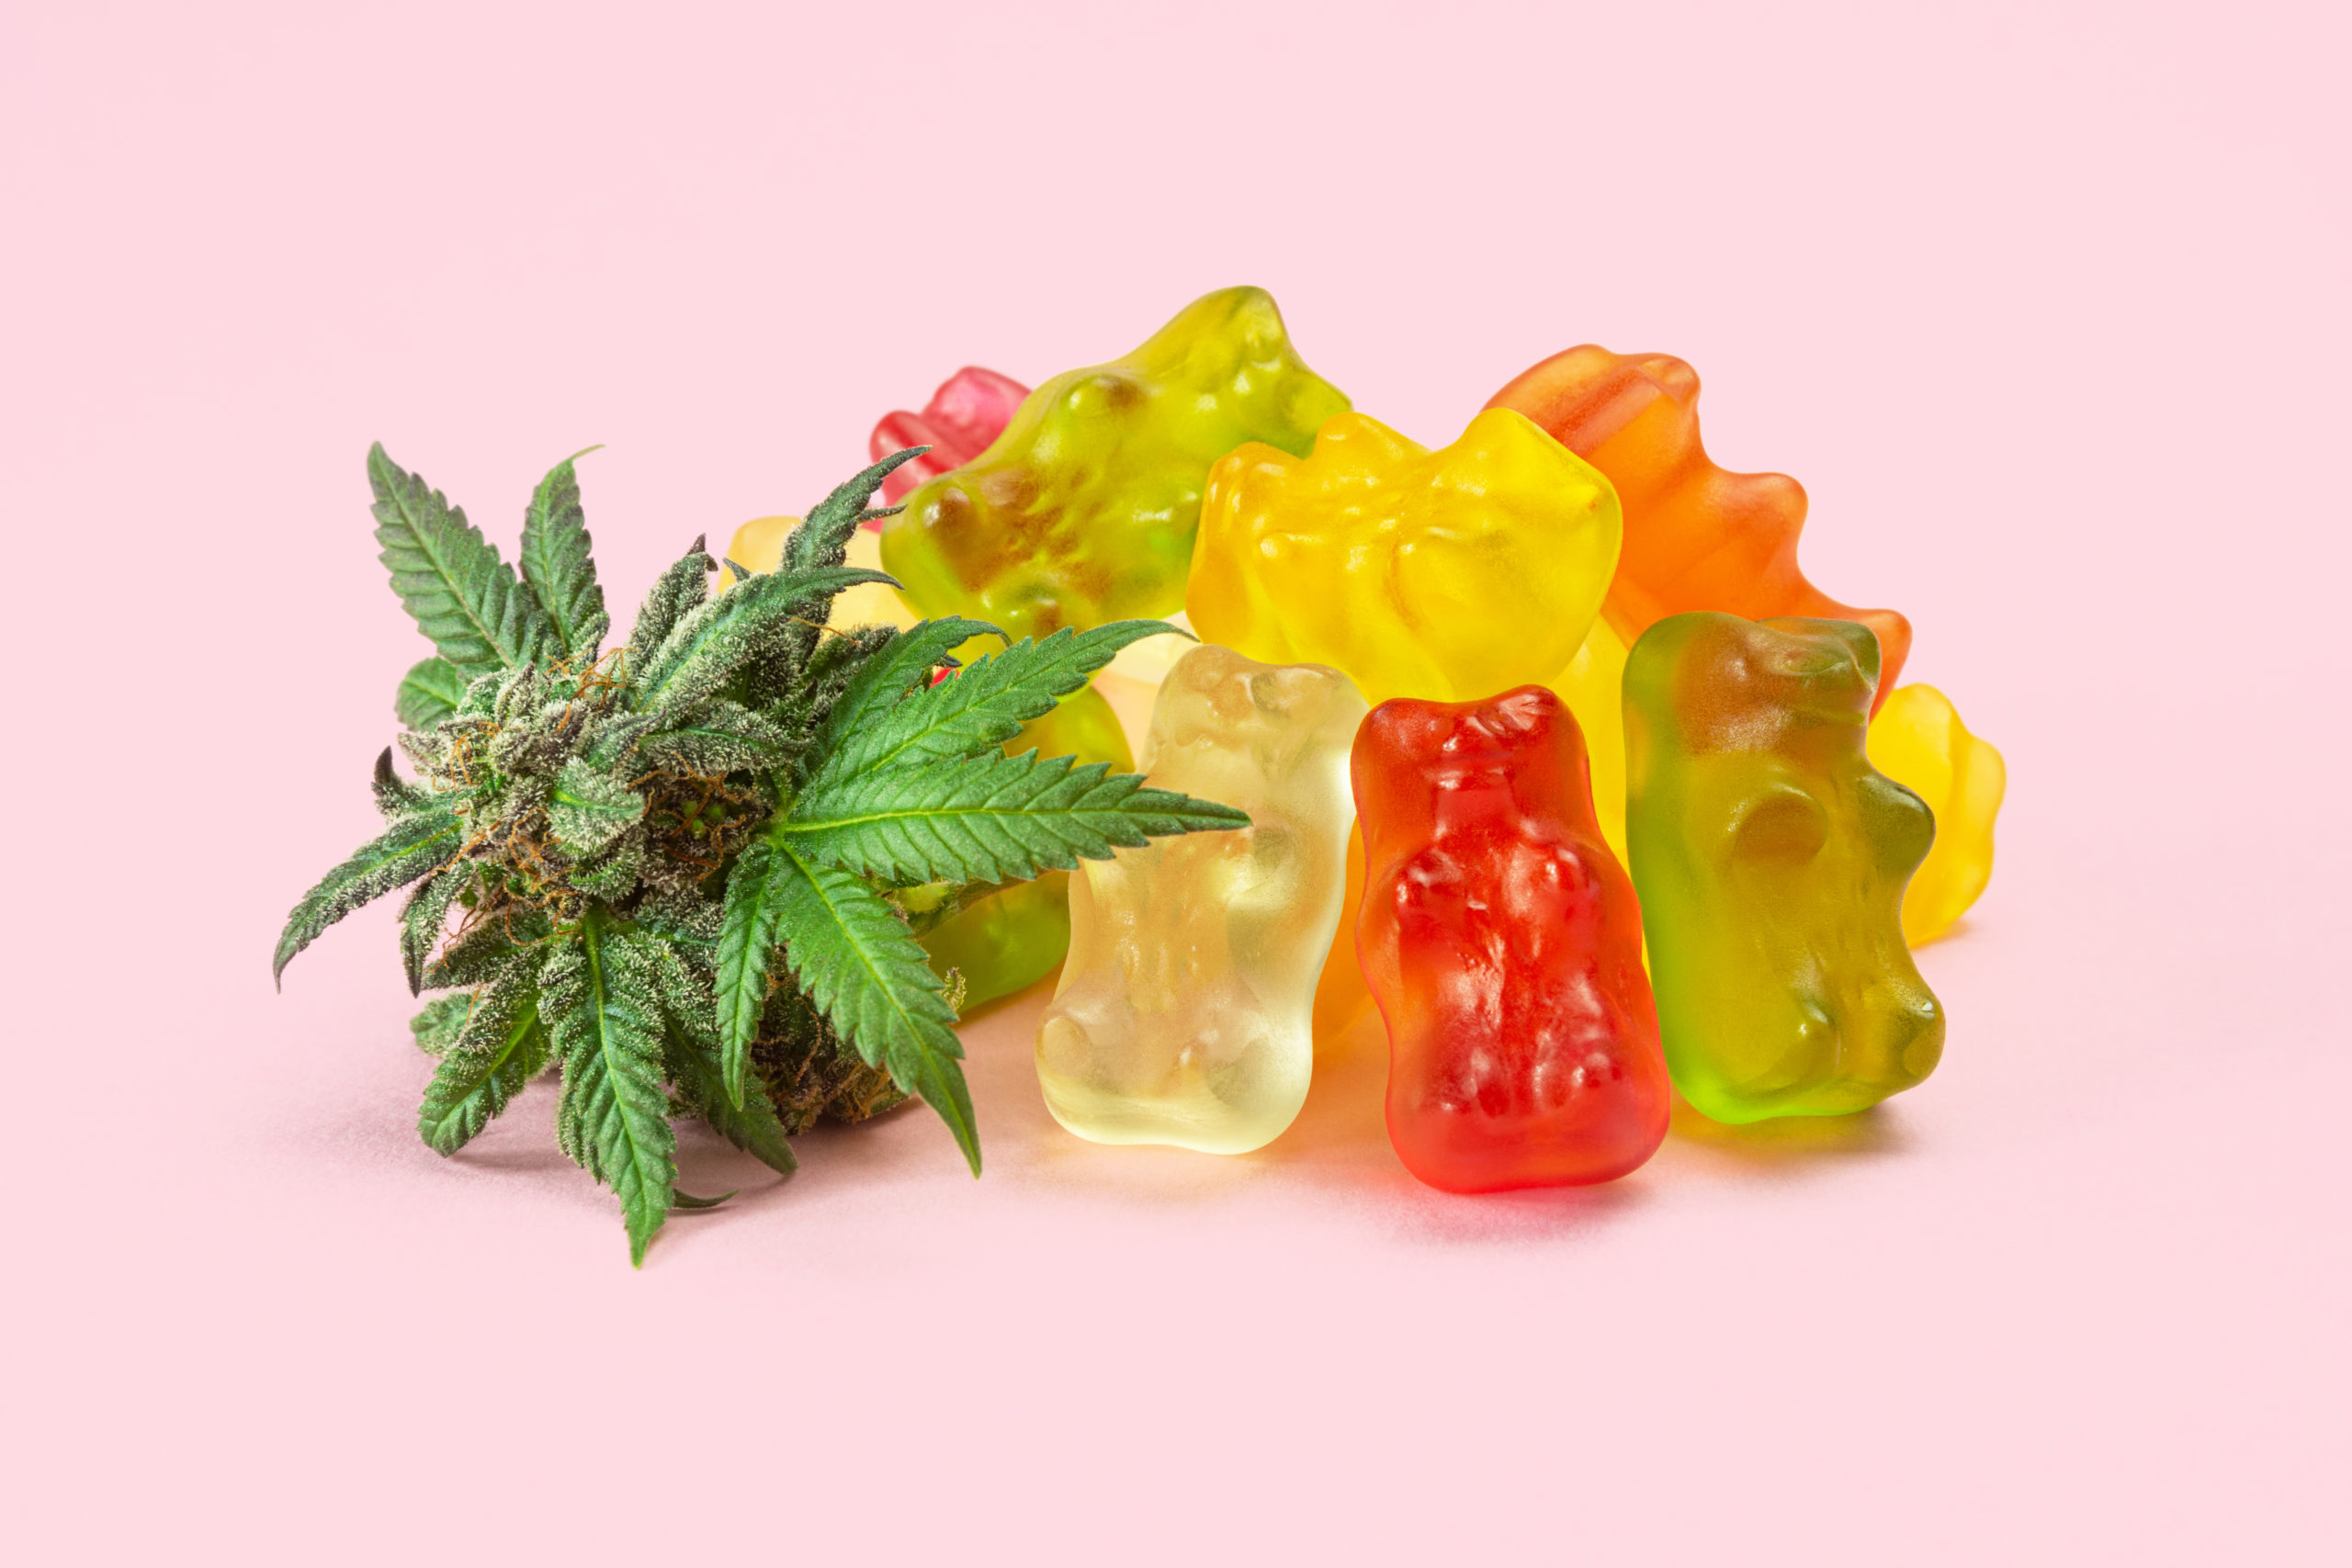 Virginia Lawmakers Propose Ban On Candy-Like Weed Edibles To Prevent Child Exposures